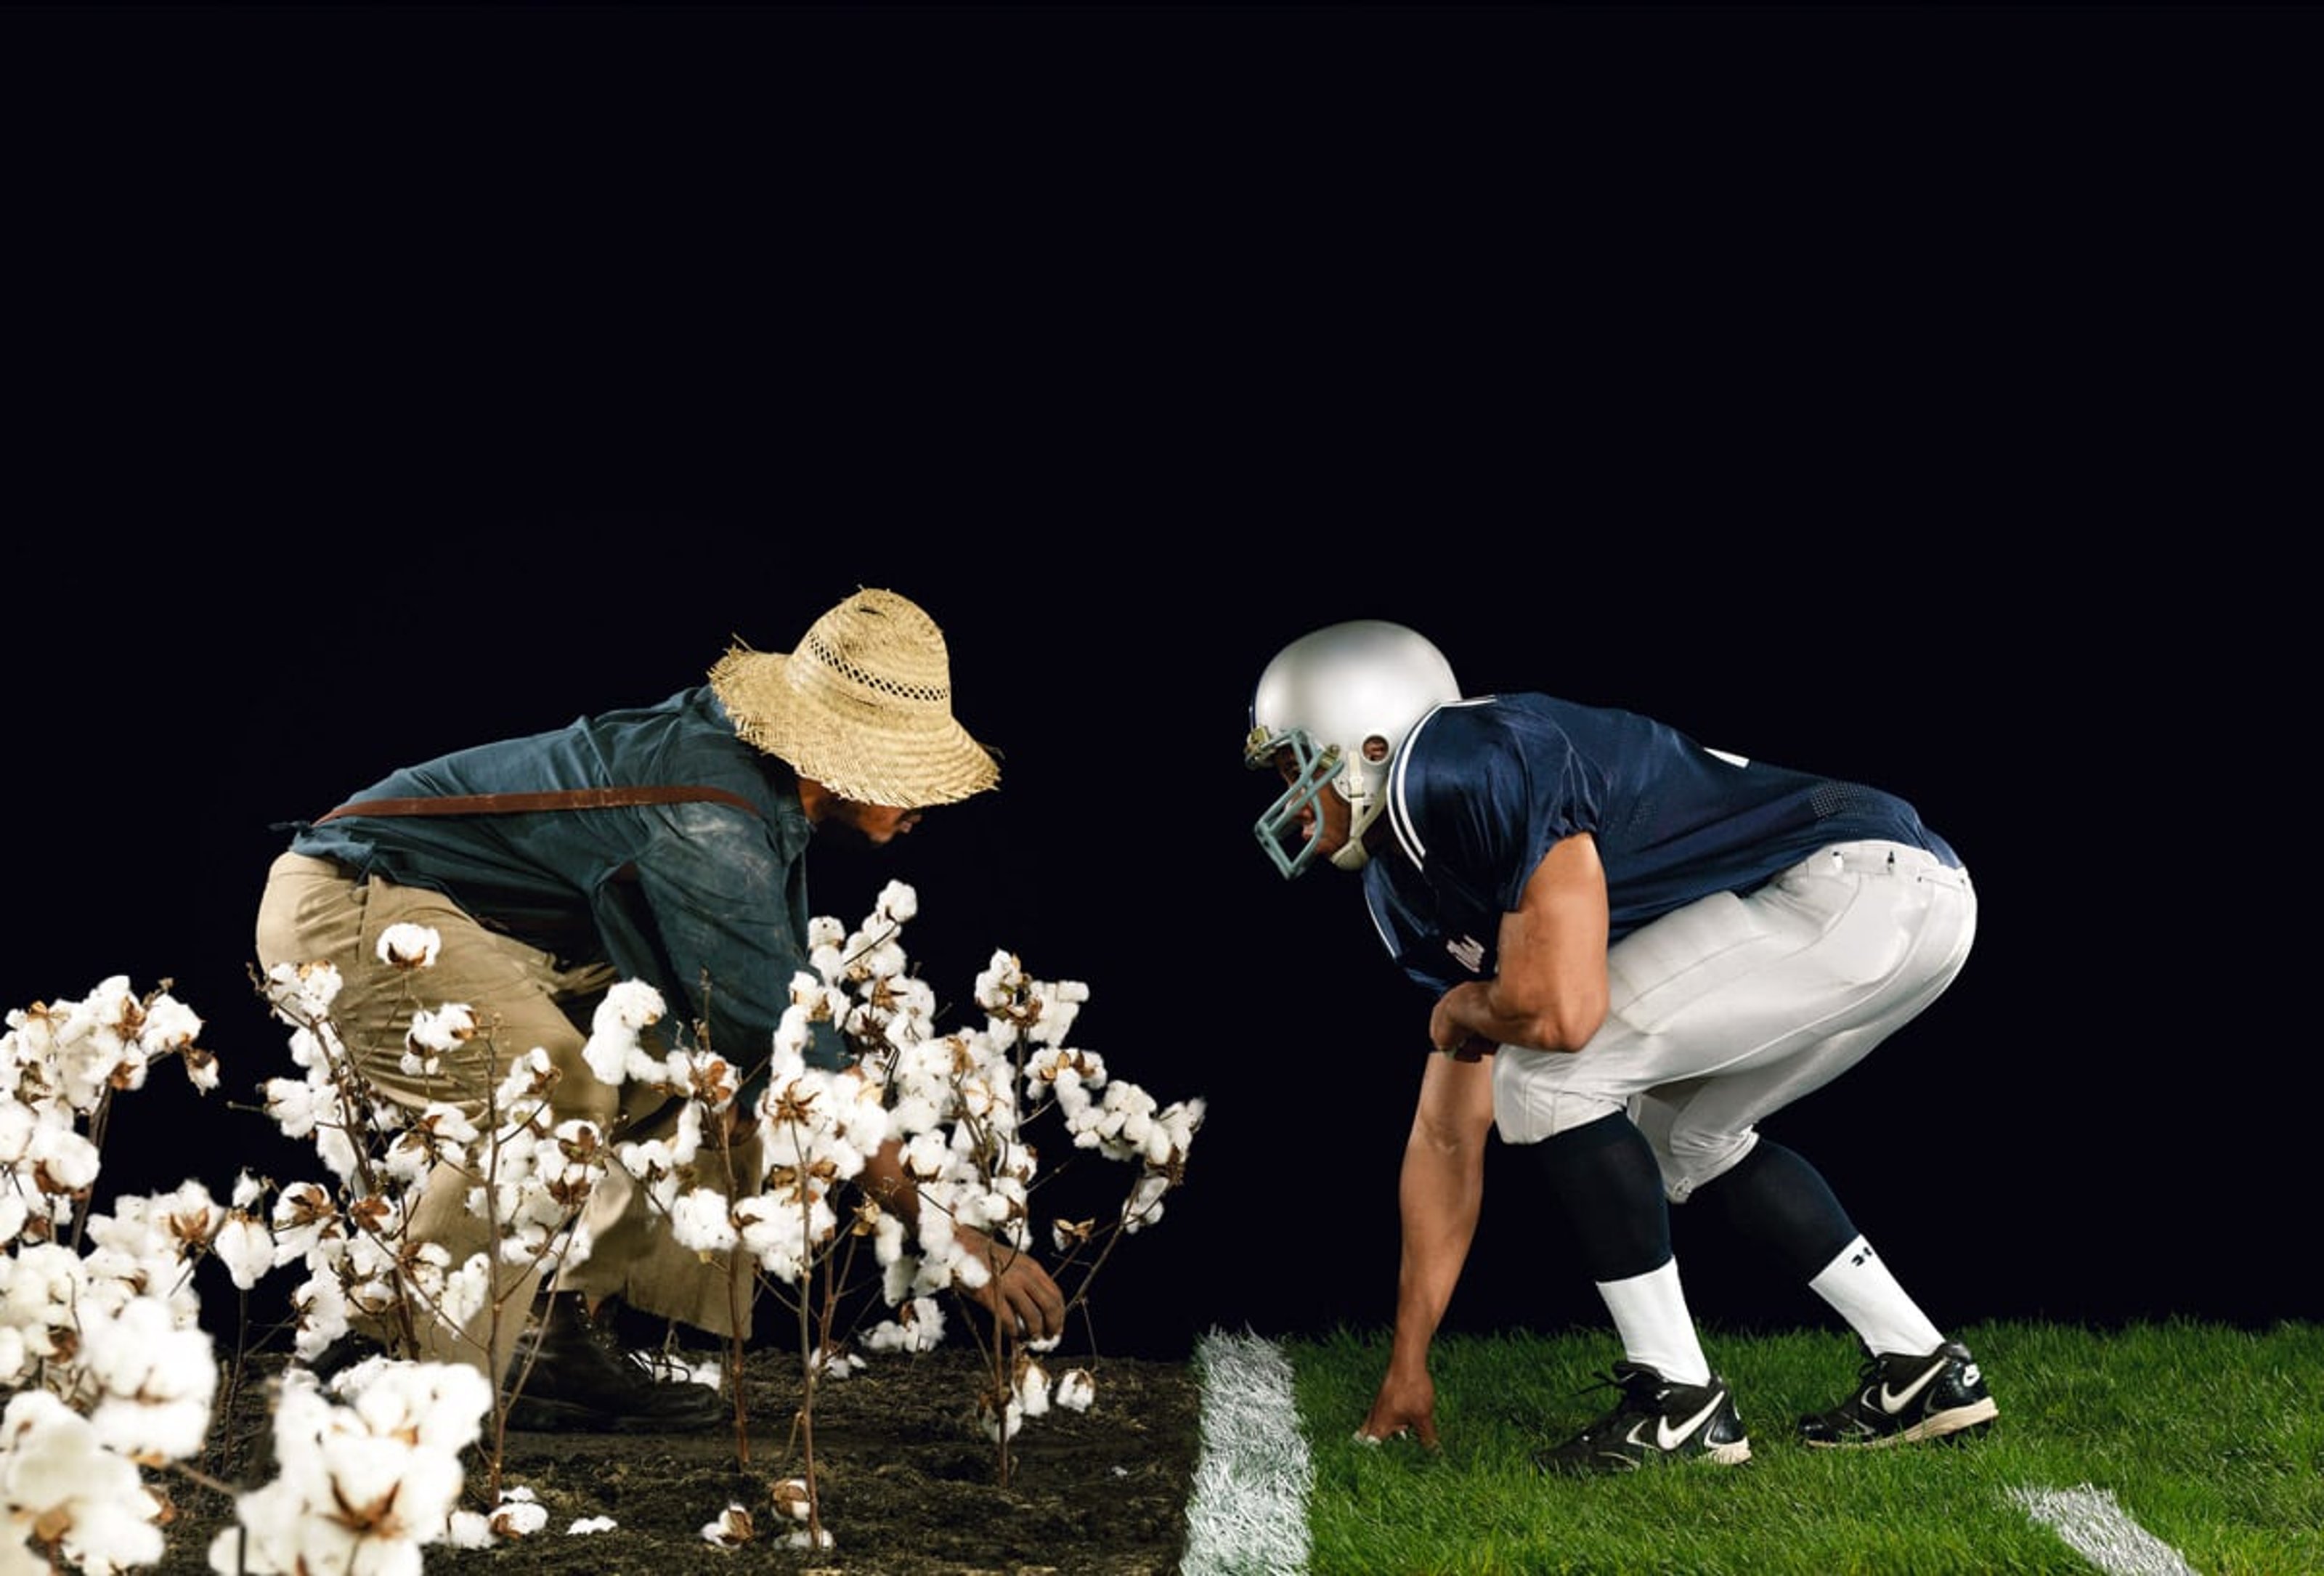 A cotton picker on the left and a football player on the right confronting each other in symmetric poses